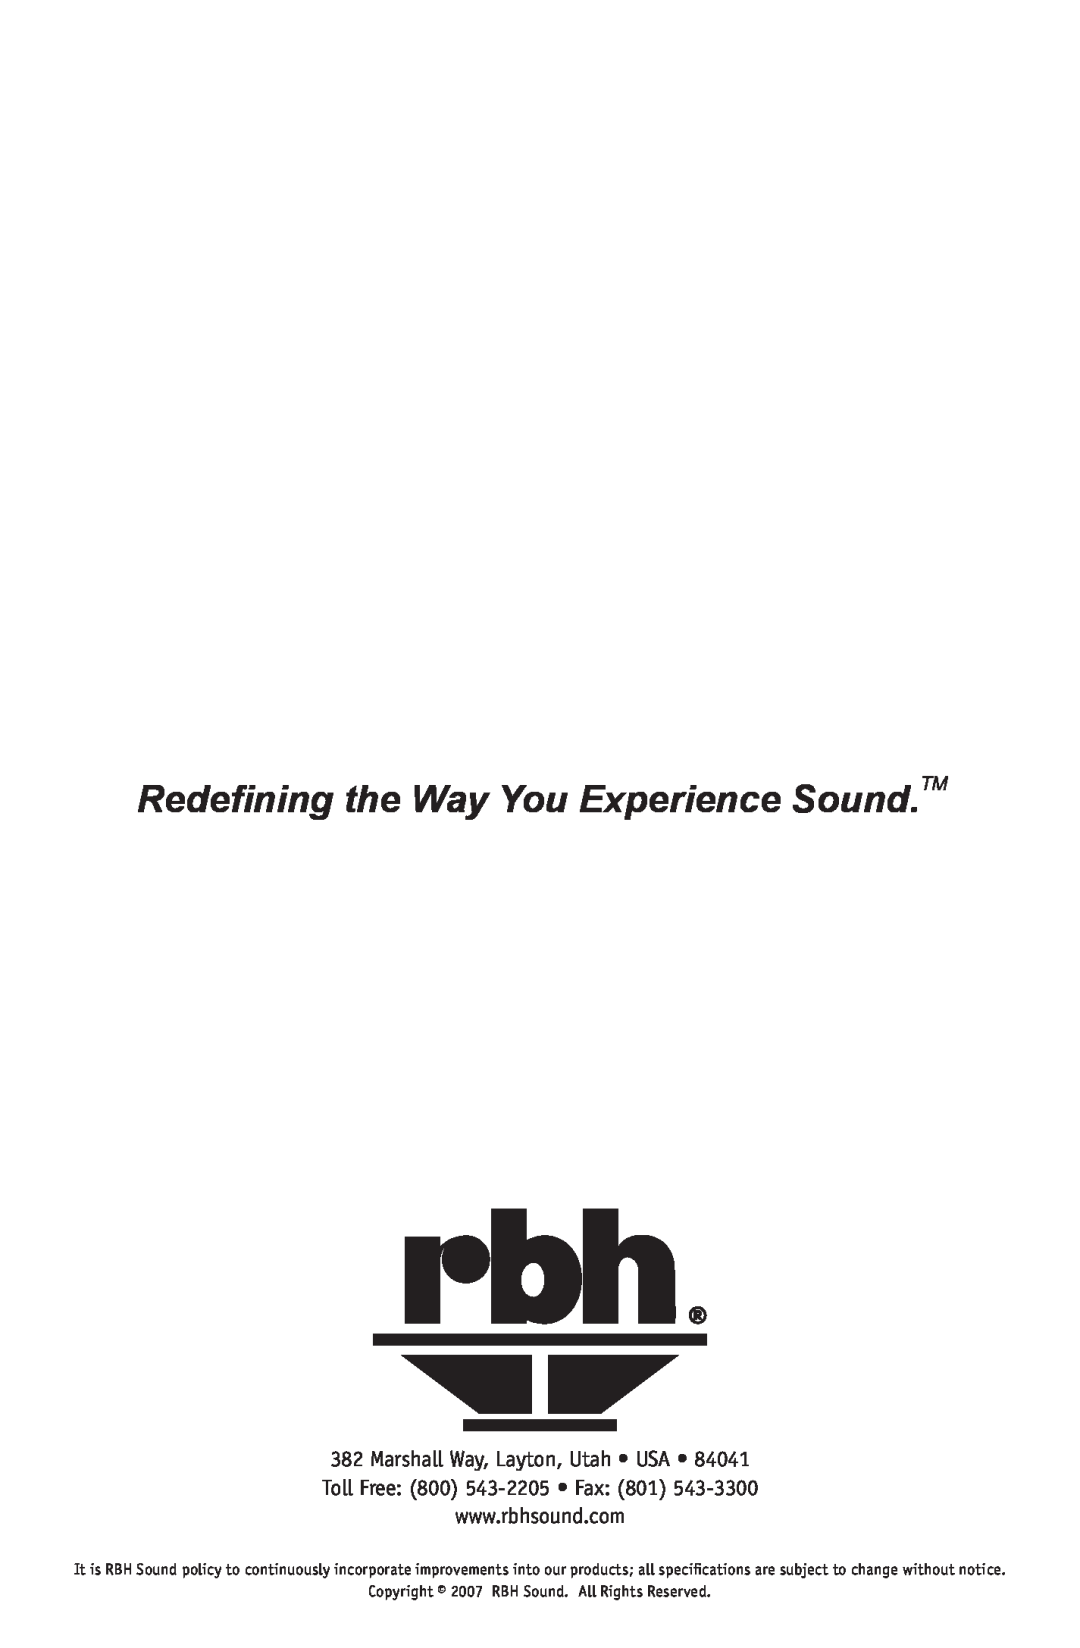 RBH Sound CT-7, CT-5 owner manual Redefining the Way You Experience Sound.TM, Copyright 2007 RBH Sound. All Rights Reserved 